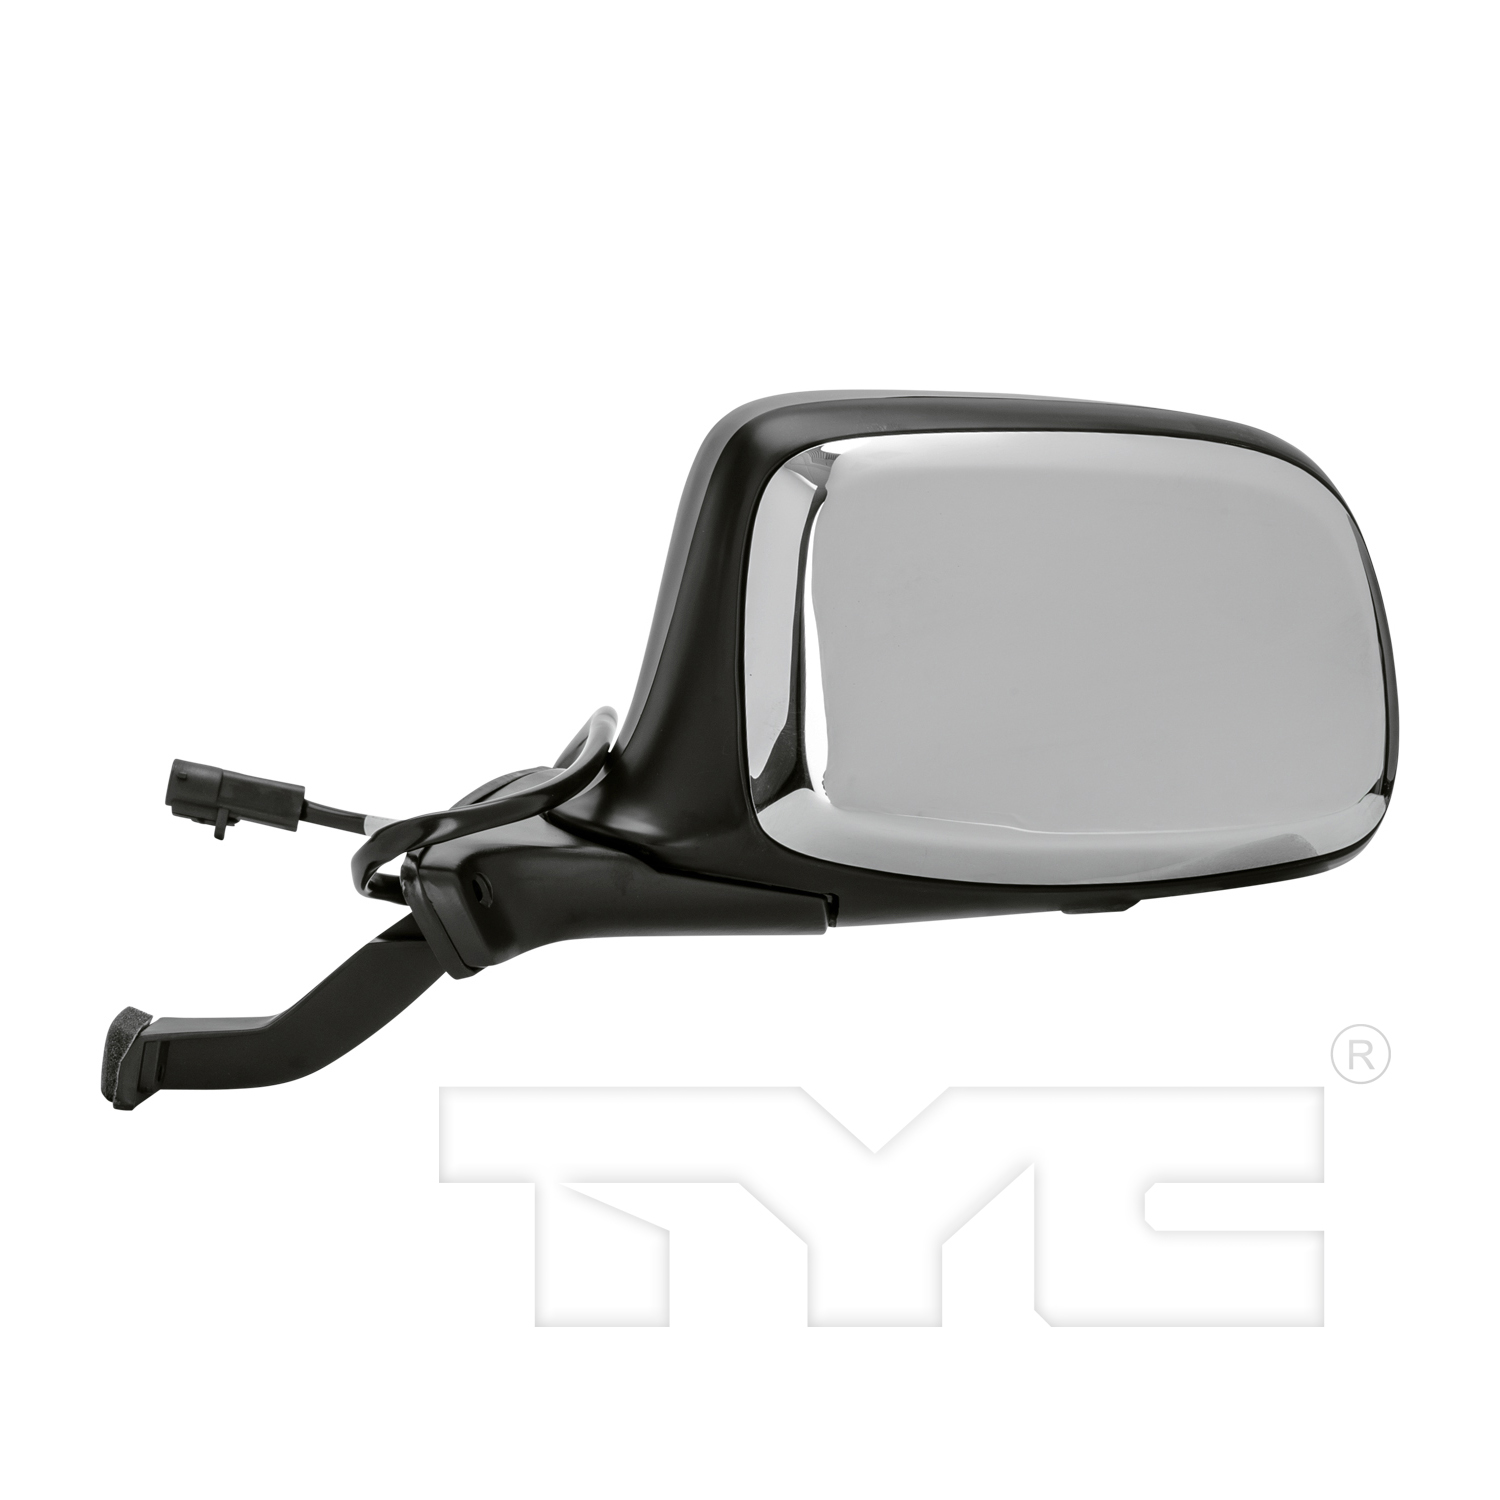 Aftermarket MIRRORS for FORD - F-150, F-150,92-96,LT Mirror outside rear view